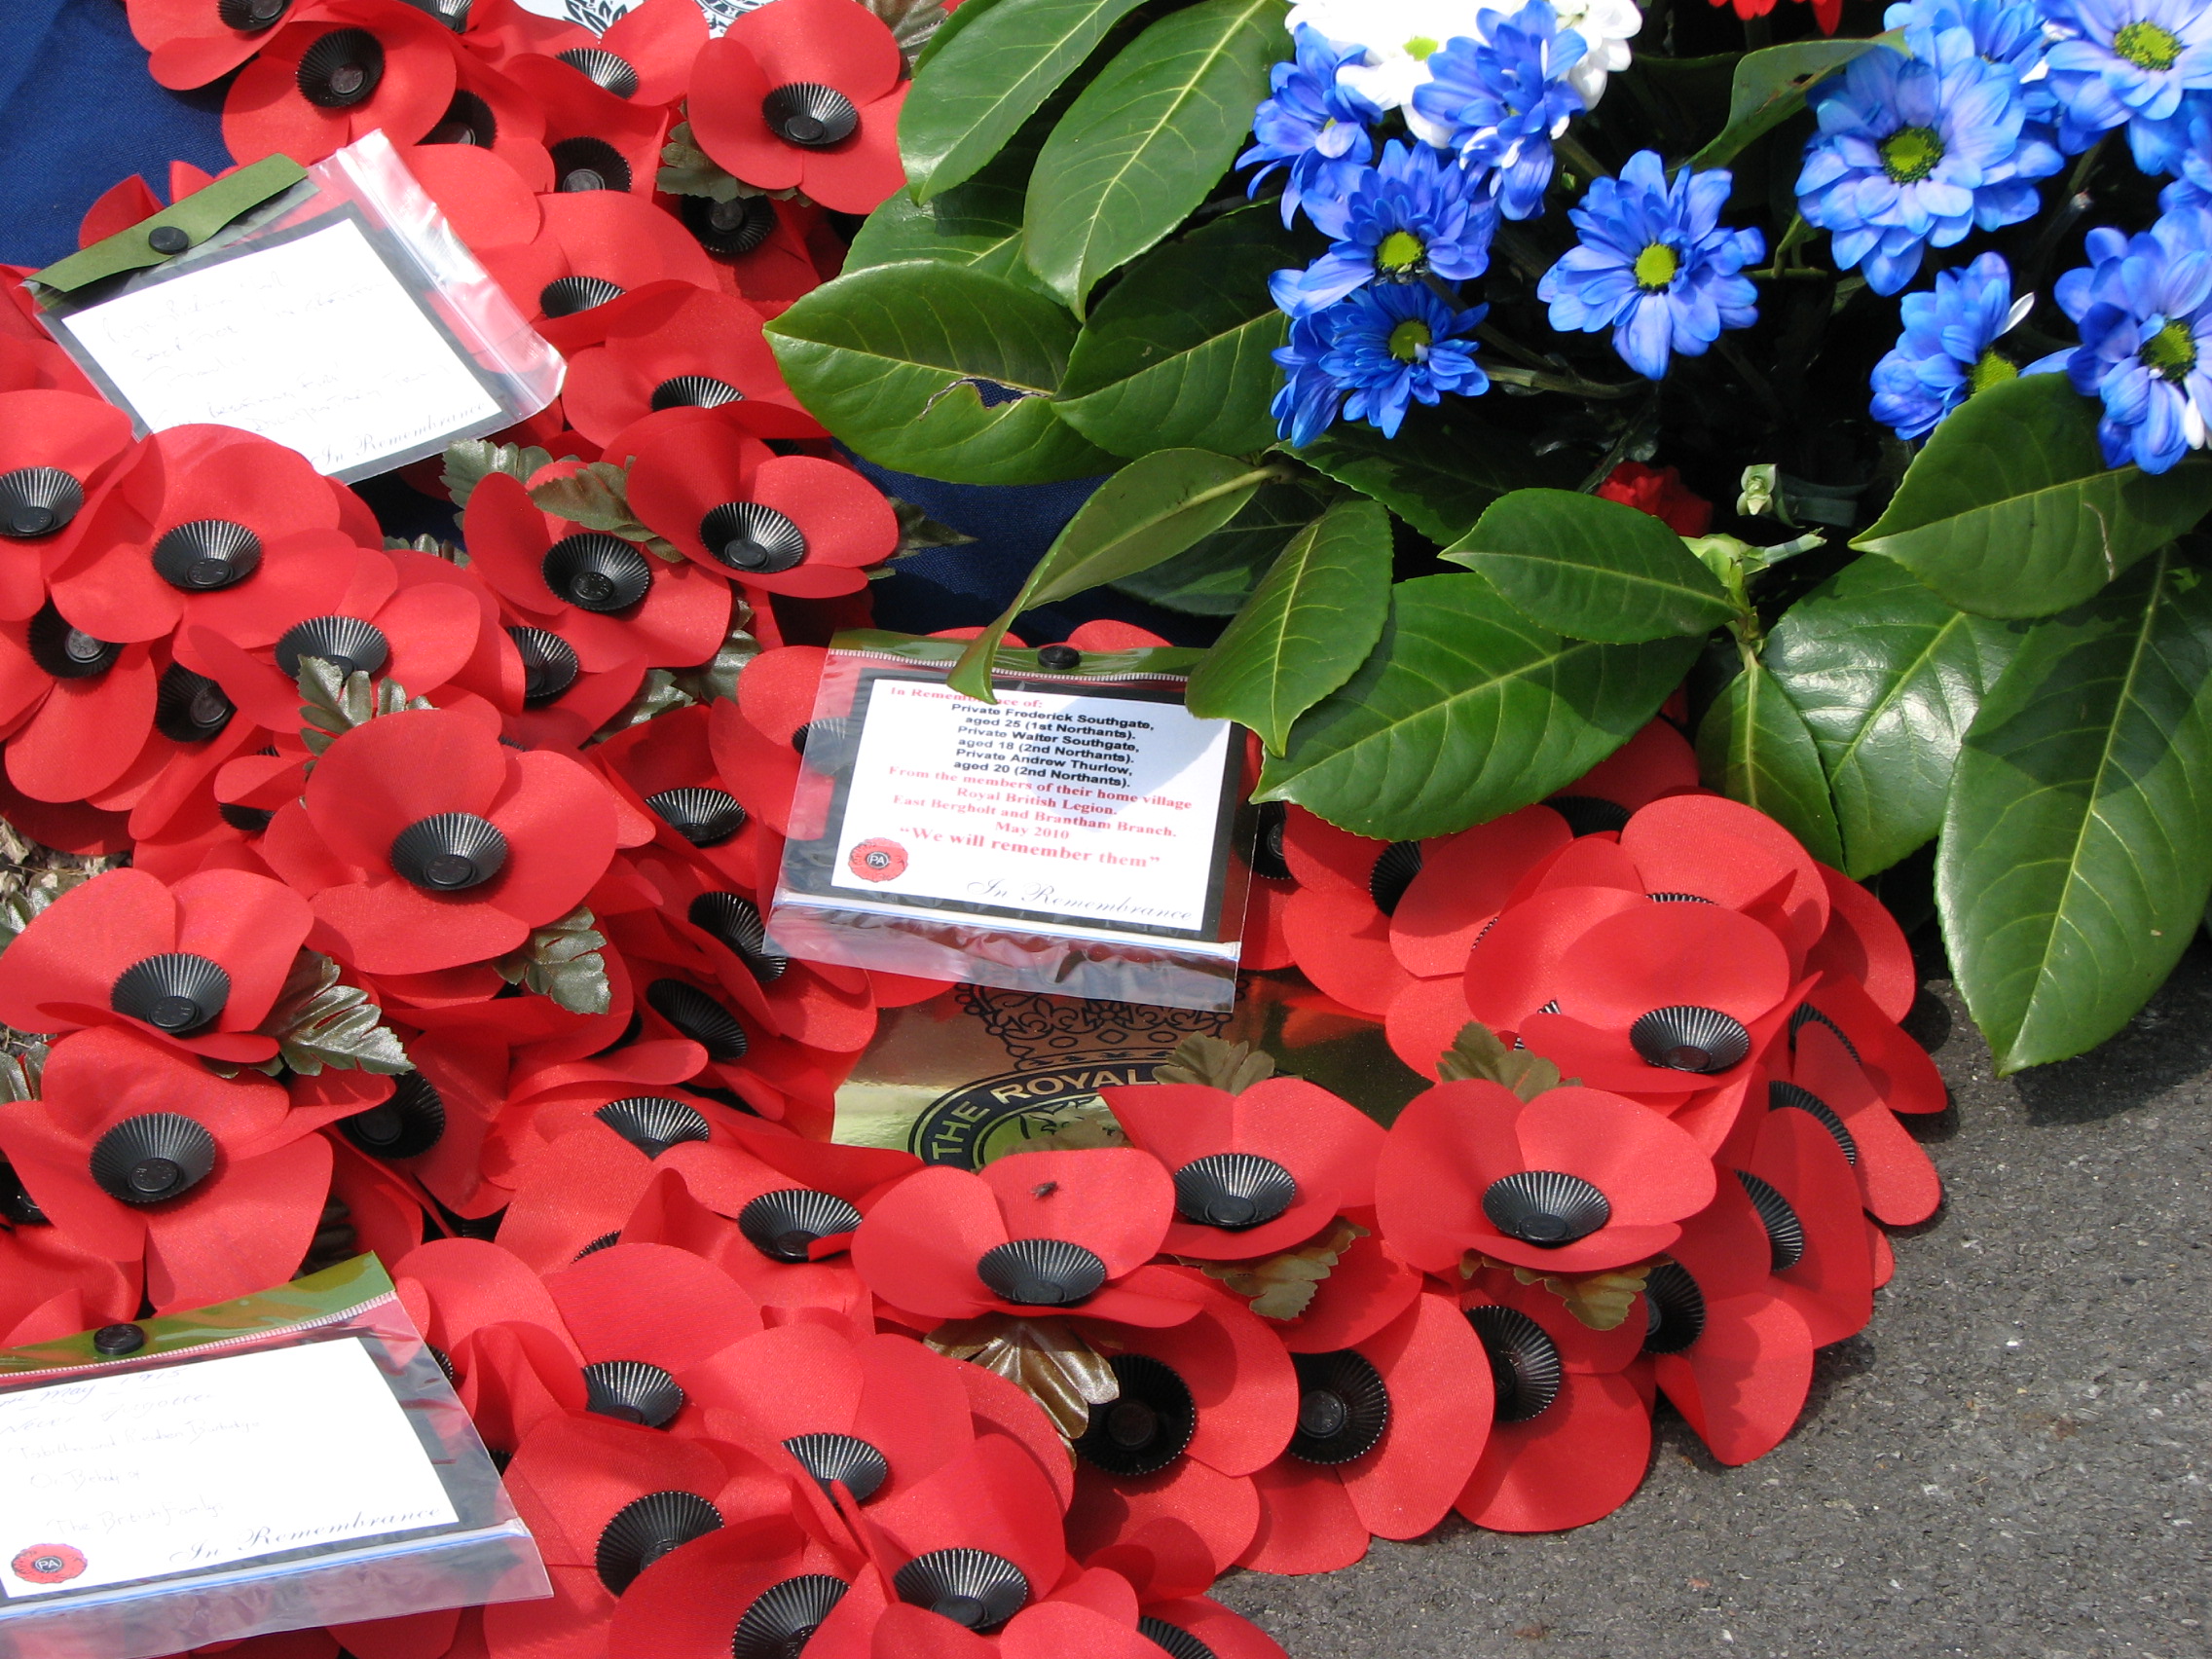 The wreath laid on behalf of the East Bergholt Branch of the Royal British Legion, at the Memorial Service to mark the 95th Anniversary of the Battle of Aubers Ridge, 9th May 2010.<br>MA